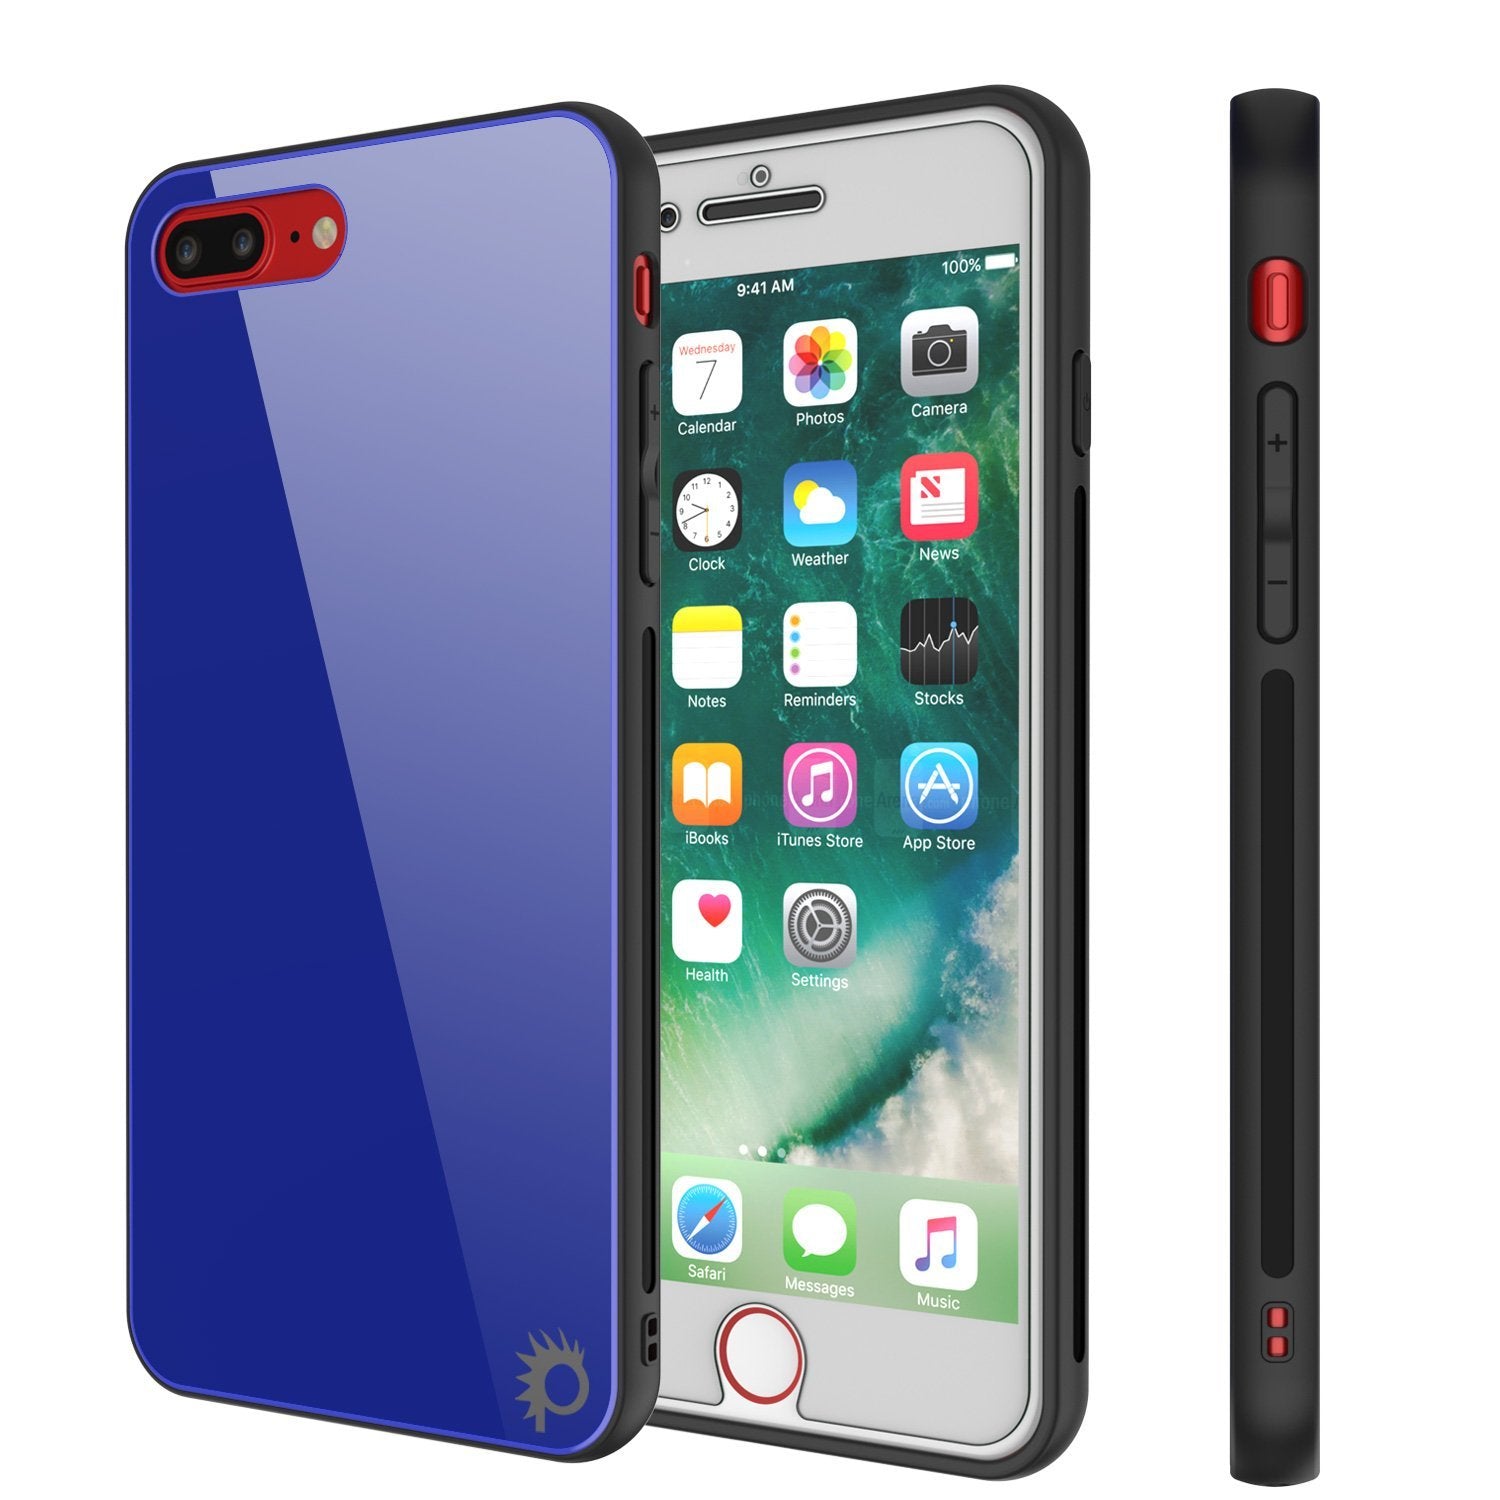 iPhone 8 PLUS Case, Punkcase GlassShield Ultra Thin Protective 9H Full Body Tempered Glass Cover W/ Drop Protection & Non Slip Grip for Apple iPhone 7 PLUS / Apple iPhone 8 PLUS (Blue)